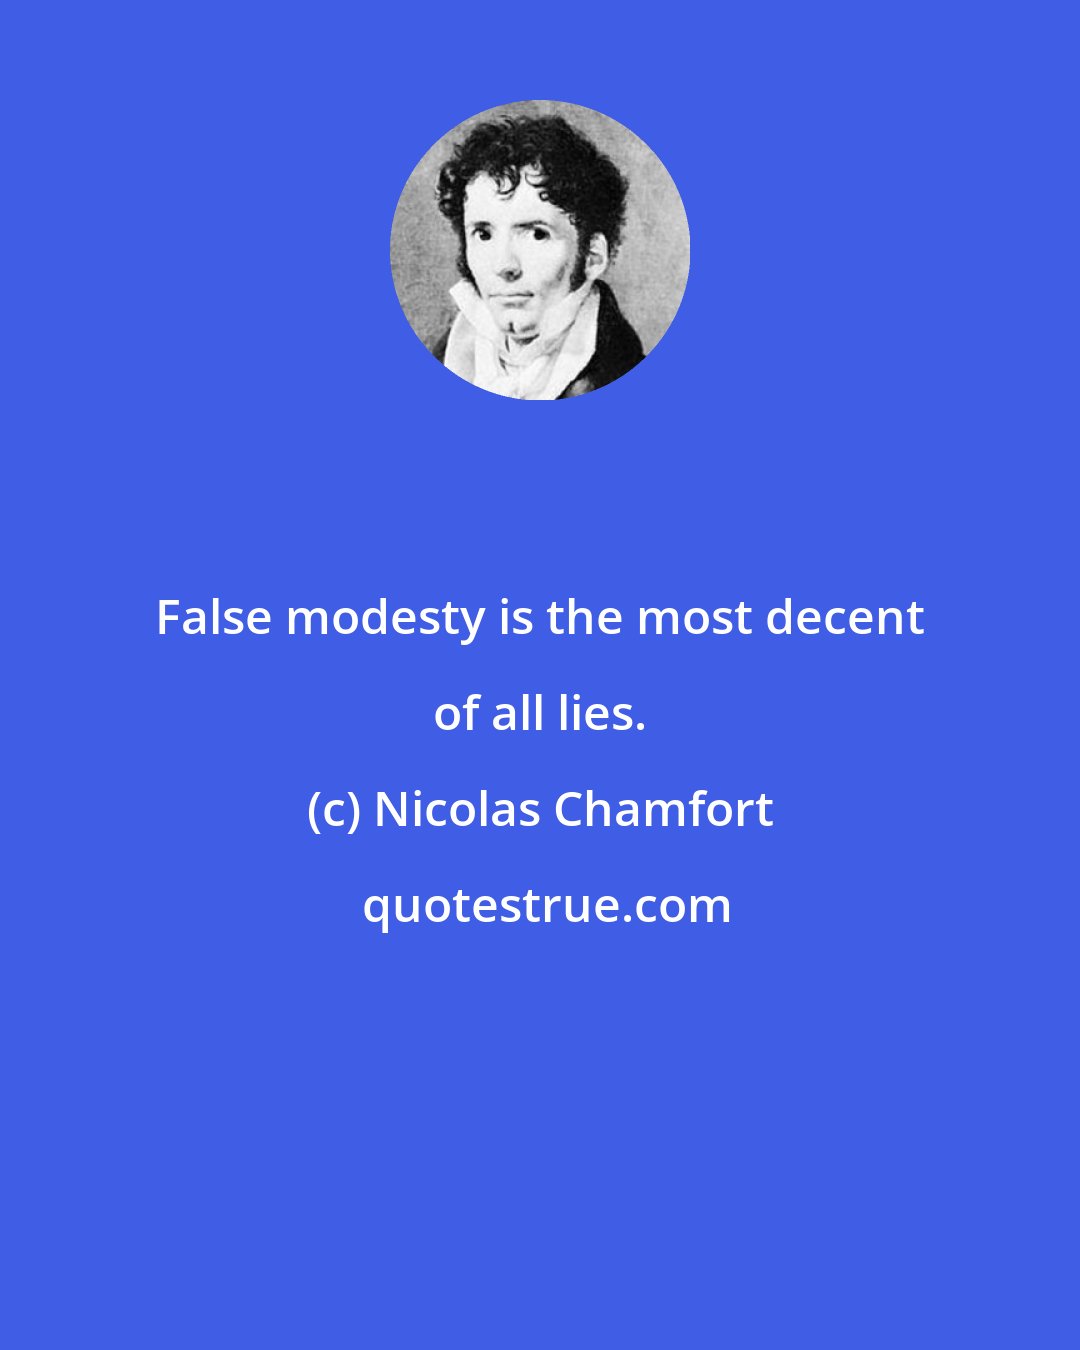 Nicolas Chamfort: False modesty is the most decent of all lies.